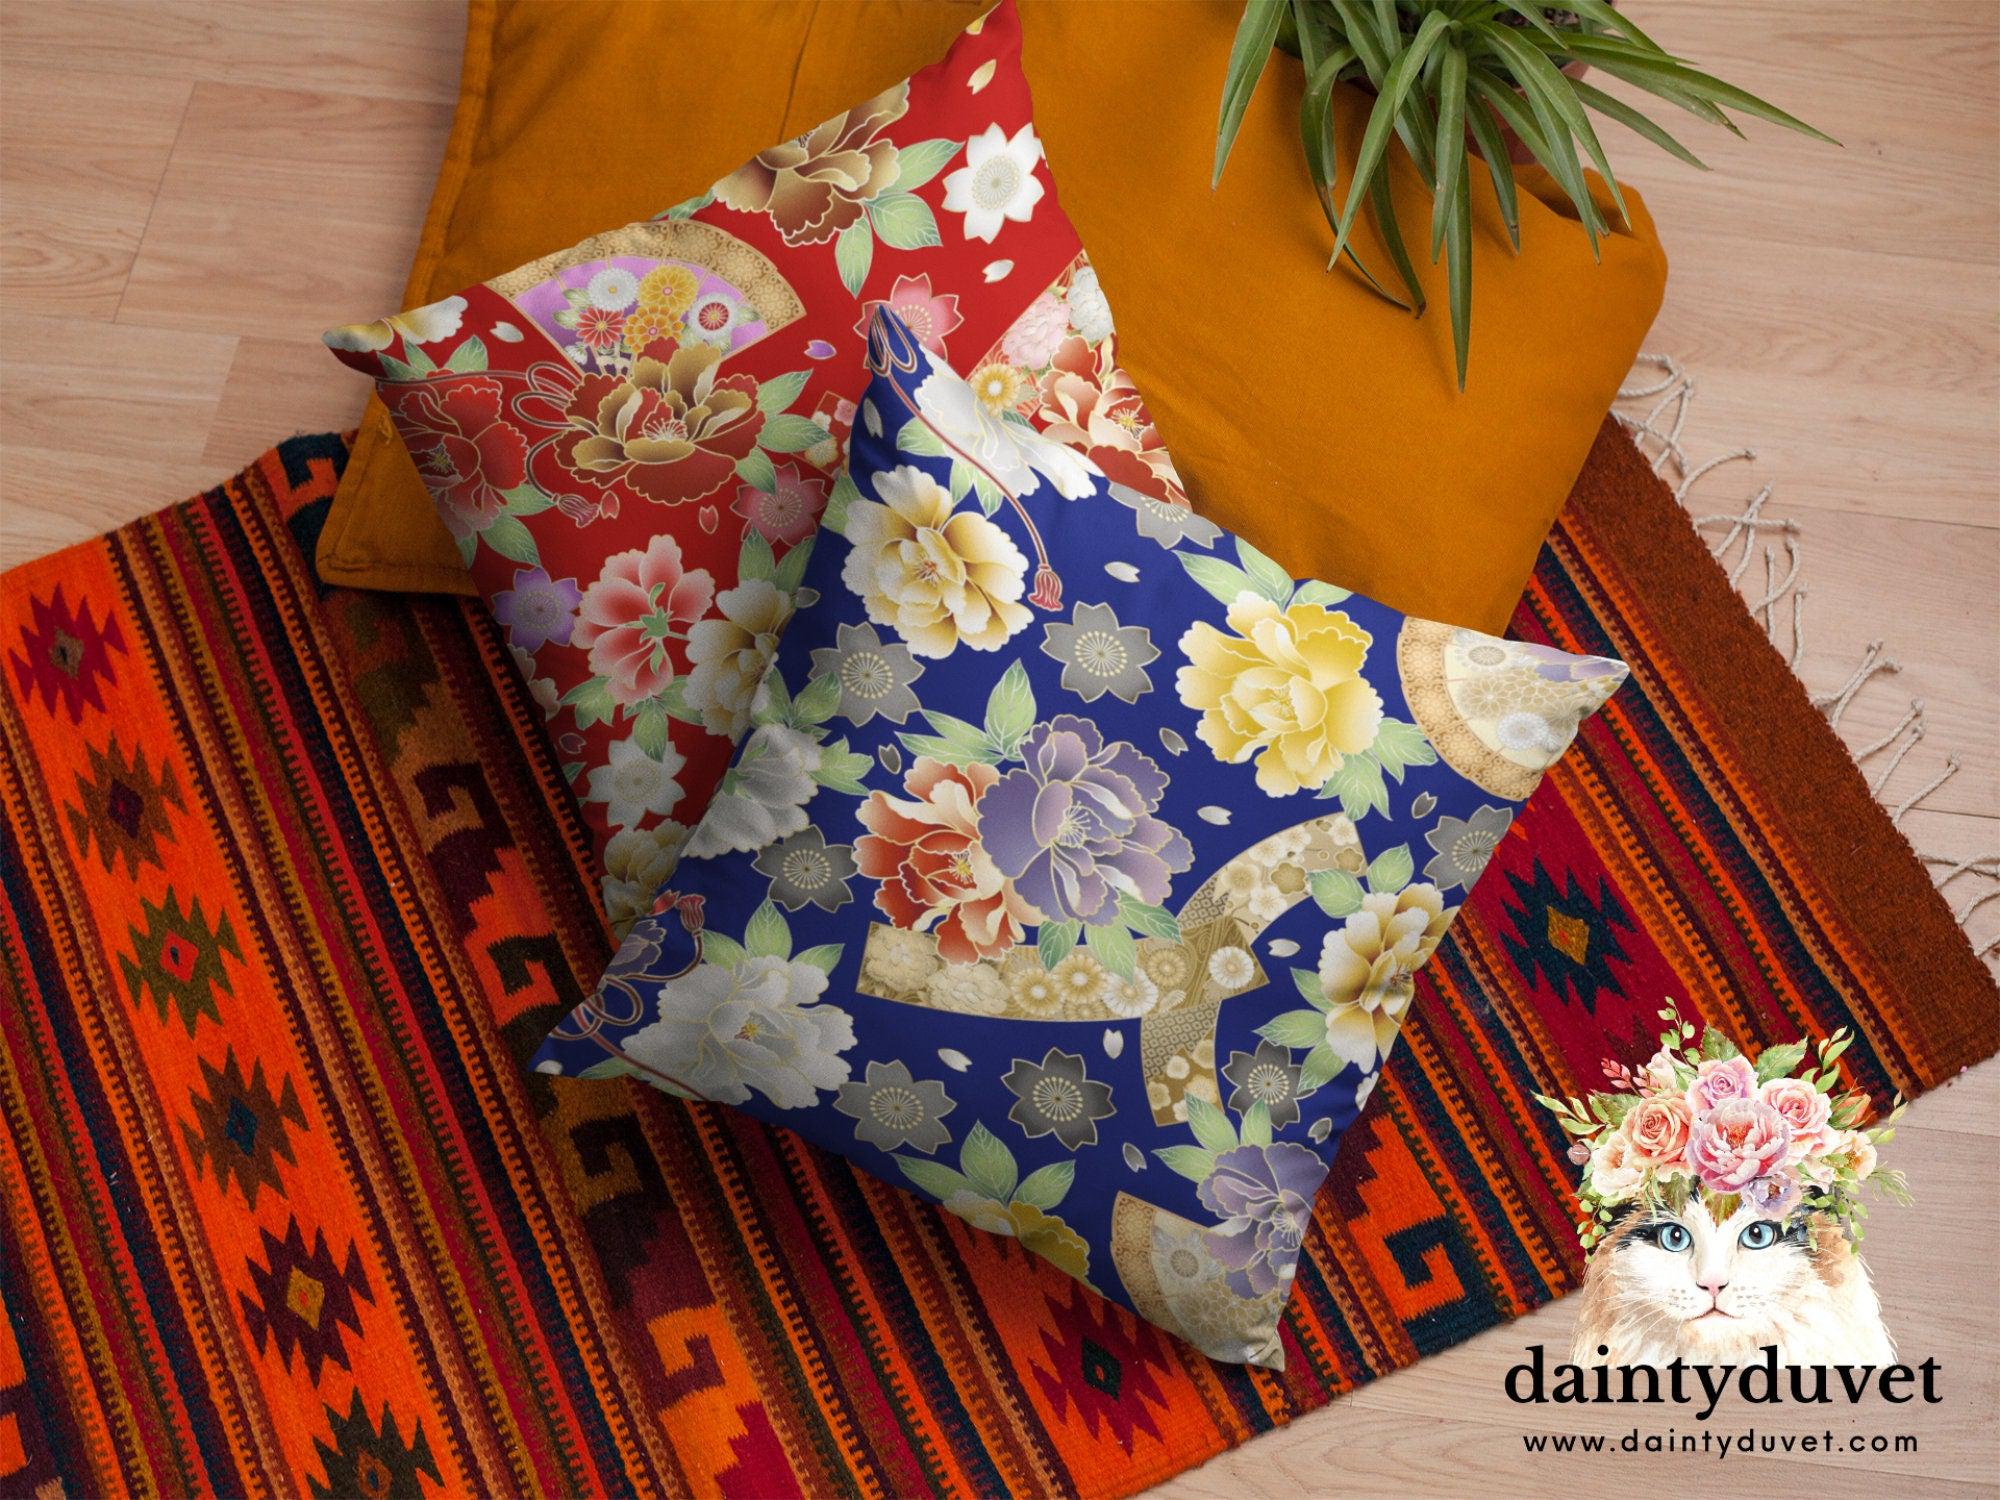 daintyduvet Floral Pillow Cover Blue, Square Pillow Cover for Throw Pillow, Chair Cushion Cover, Oriental Design Japanese Fabric Pillow